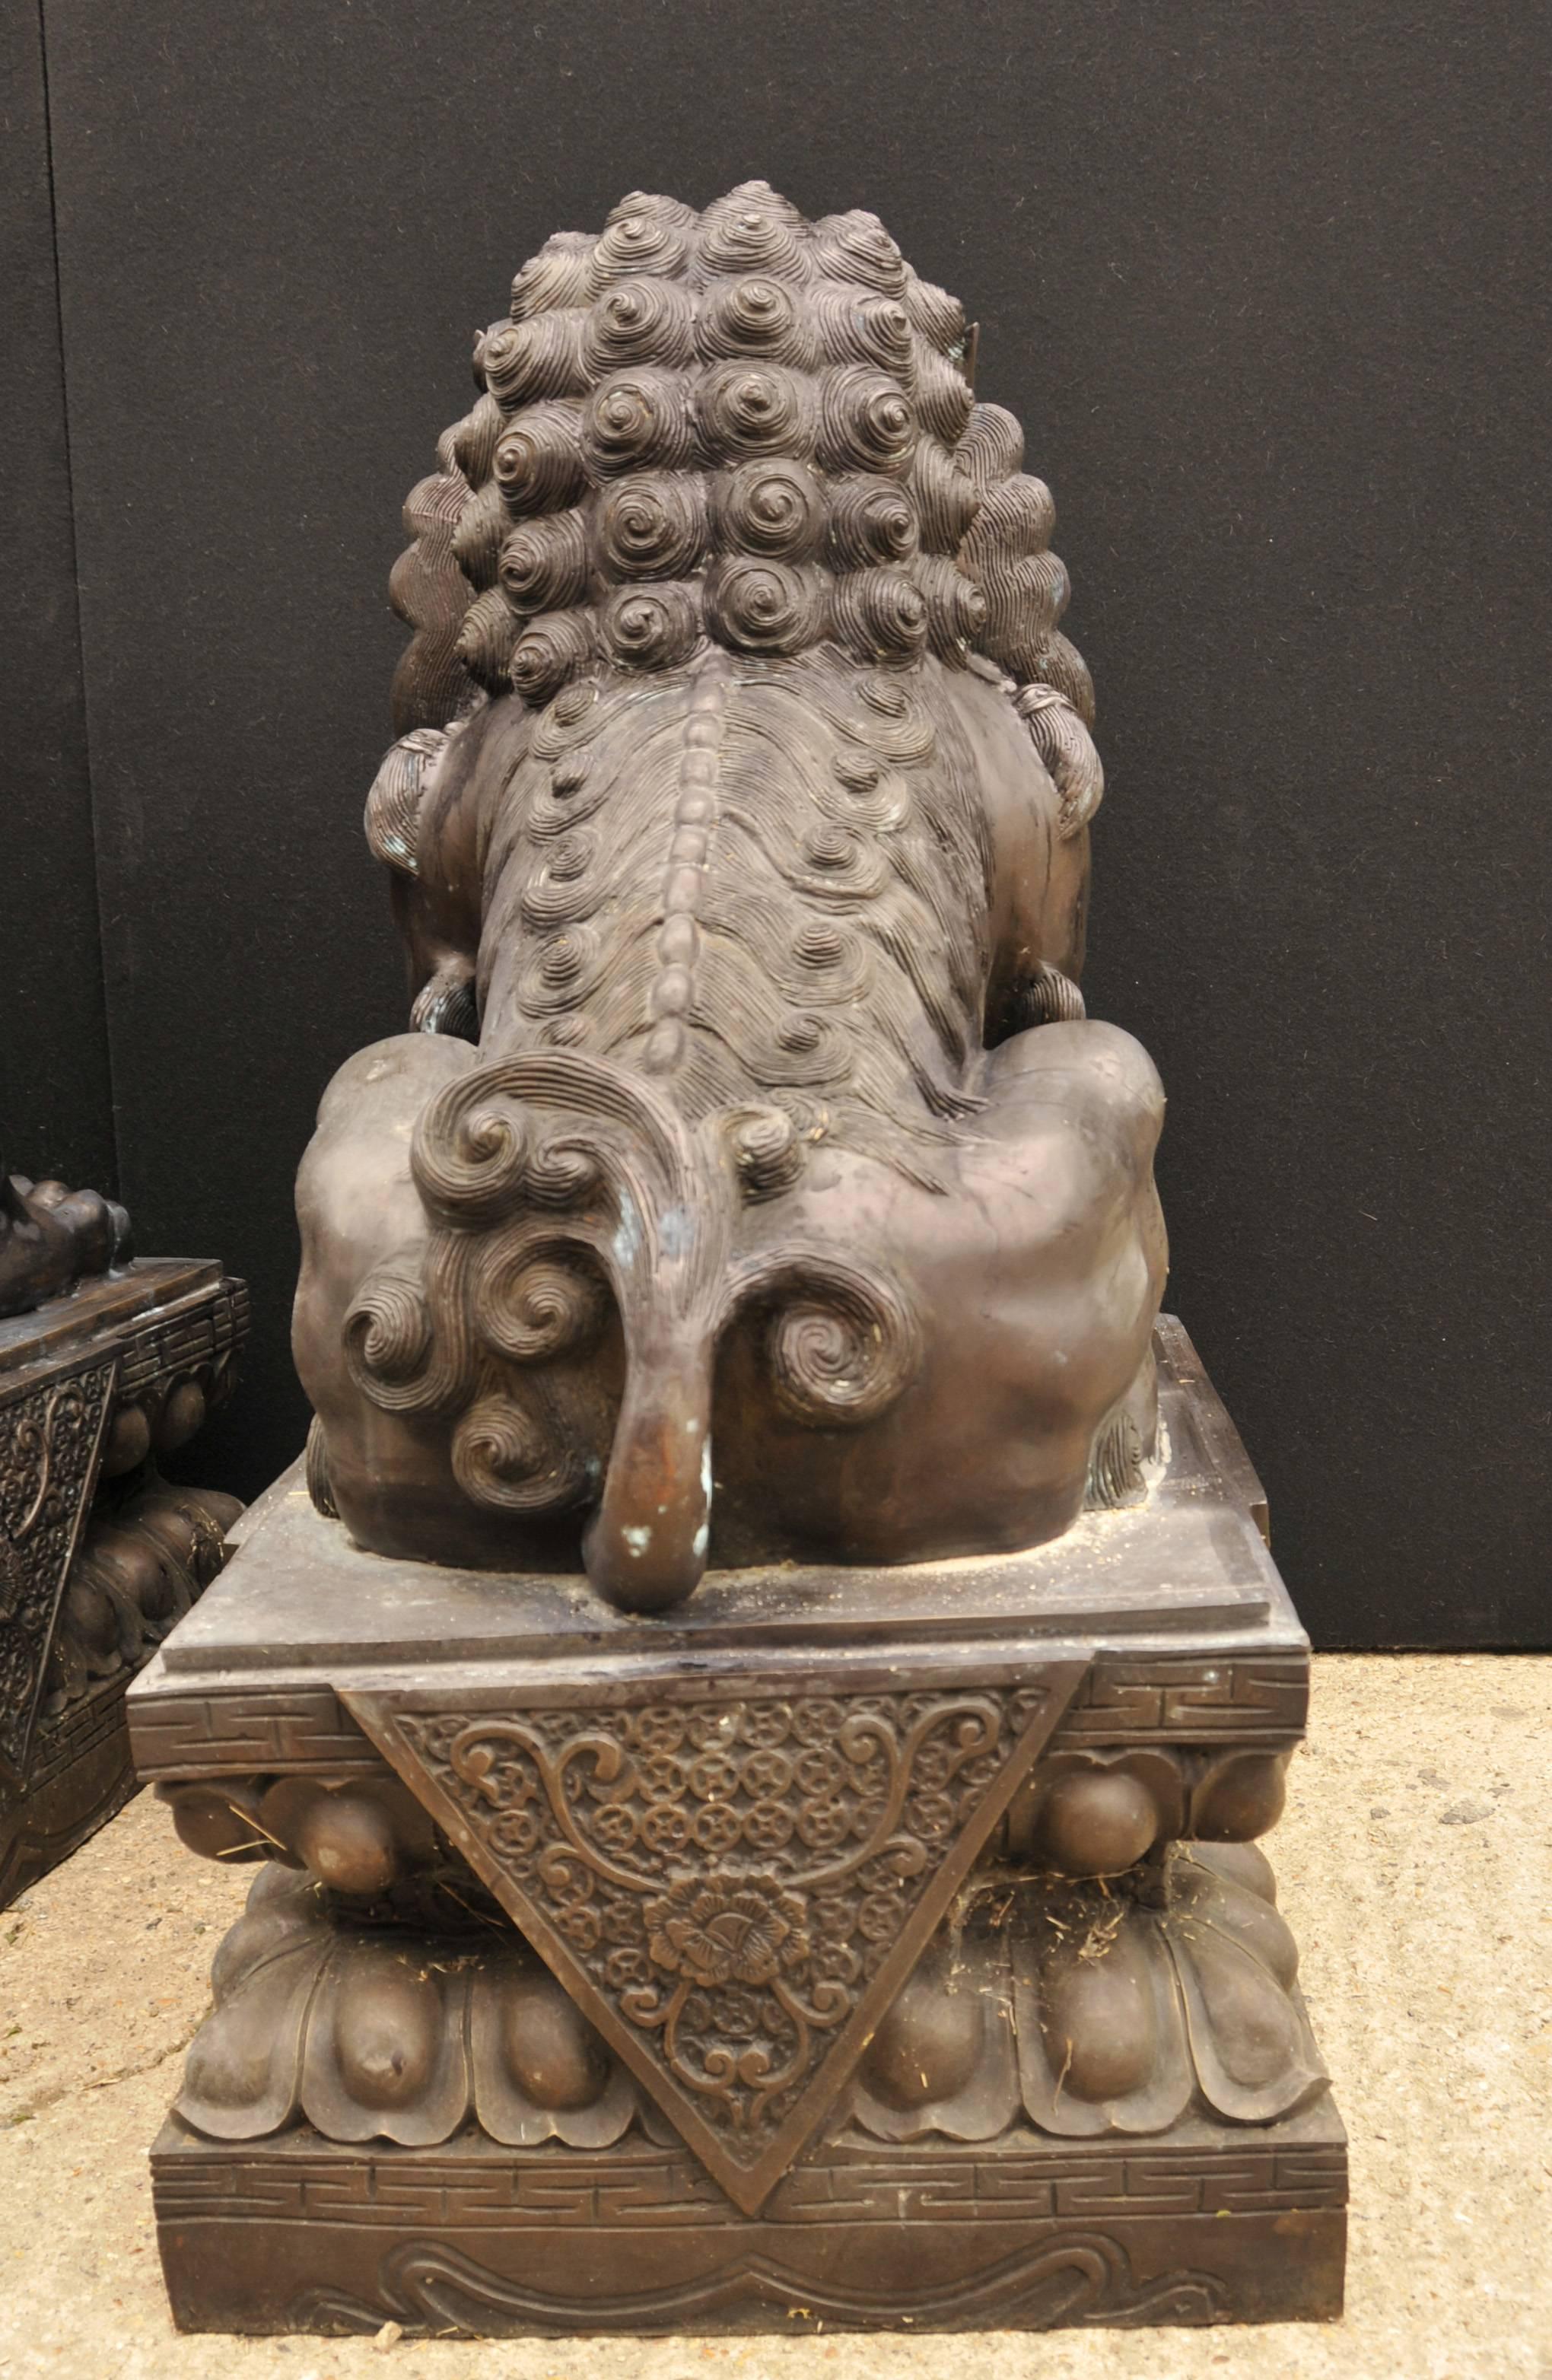 Stunning pair of bronze Chinese foo dogs.
Large pair at almost four feet tall.
In ancient Chinese mythology they are seen to ward off evil spirits, much like gargoyles in the European tradition.
Hence these are a great pair of gatekeepers for any